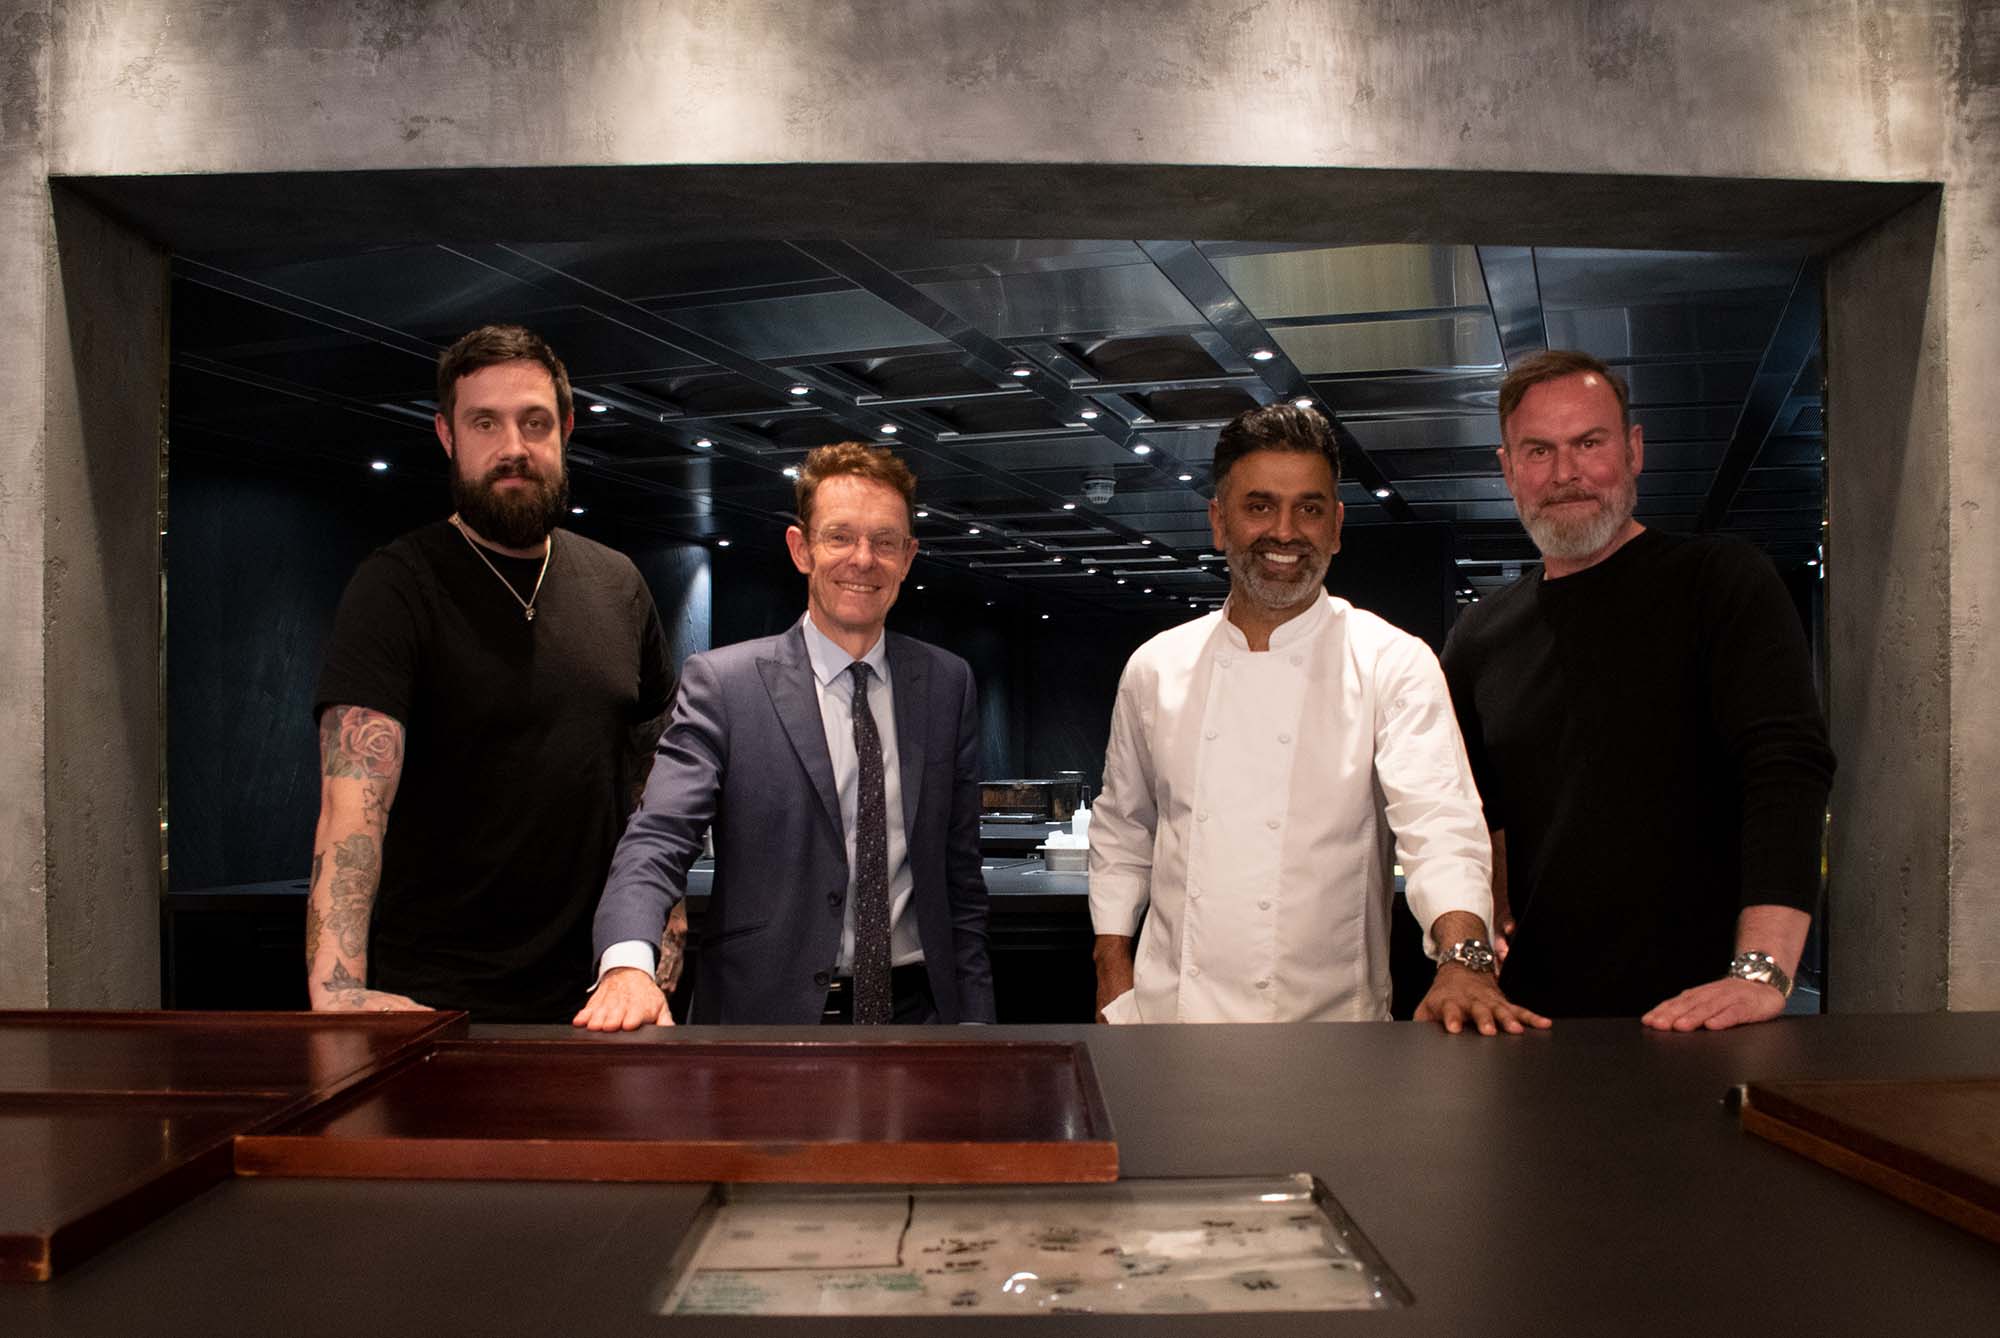 A photograph from left to right: Alex Claridge, head chef and owner of The Wilderness and the West Midland Combined Authority's night-time economy advisor; Andy Street, mayor of the West Midlands, Akhtar Islam, owner of Opheem, and Glynn Purnell, head chef and owner of Purnell.